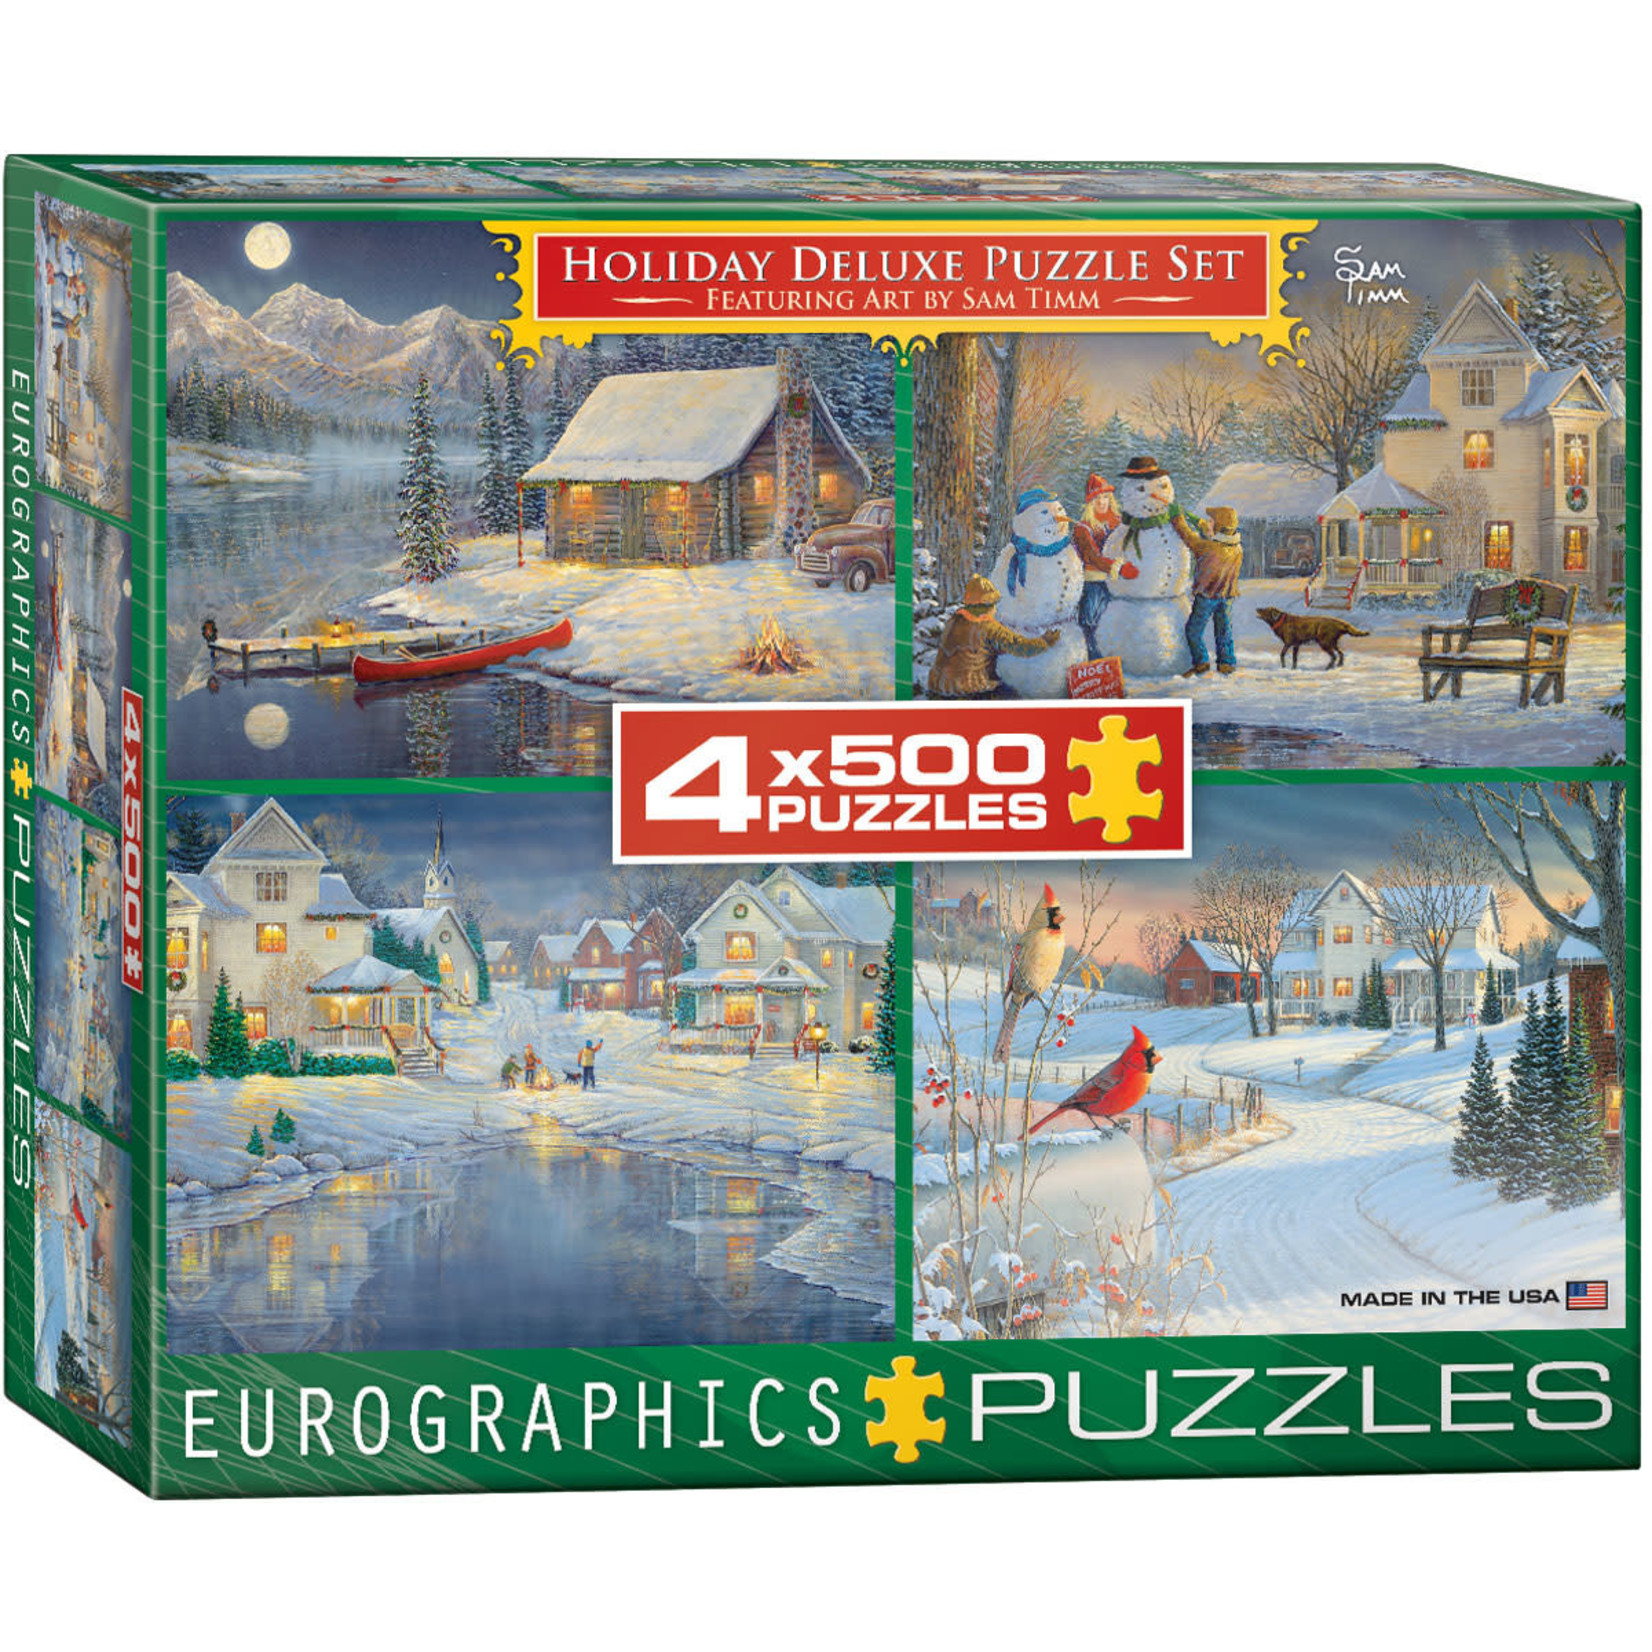 EuroGraphics Holiday Deluxe Puzzle Set 4 x 500pc